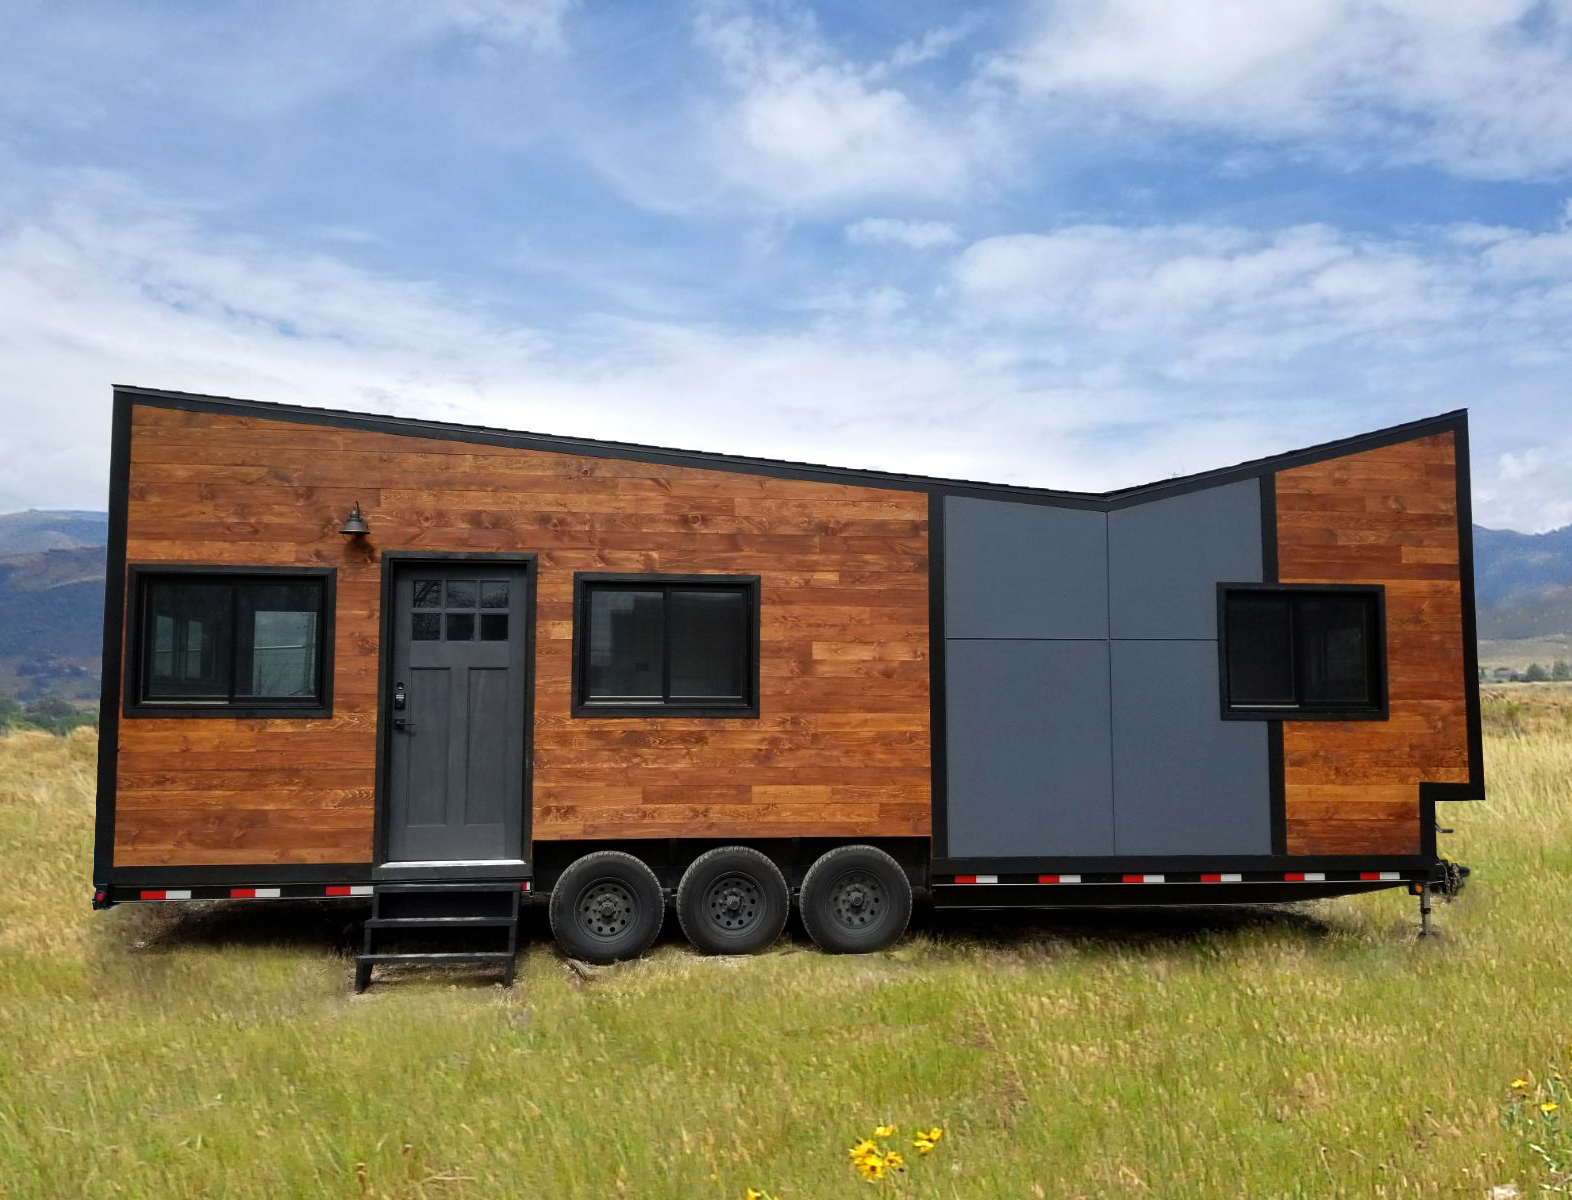 Where Can I Put My Tiny House A Near Comprehensive List Of Tiny House Parking Resources Tiny House Builders B B Micro Manufacturing,Beautiful Flower Pictures To Paint